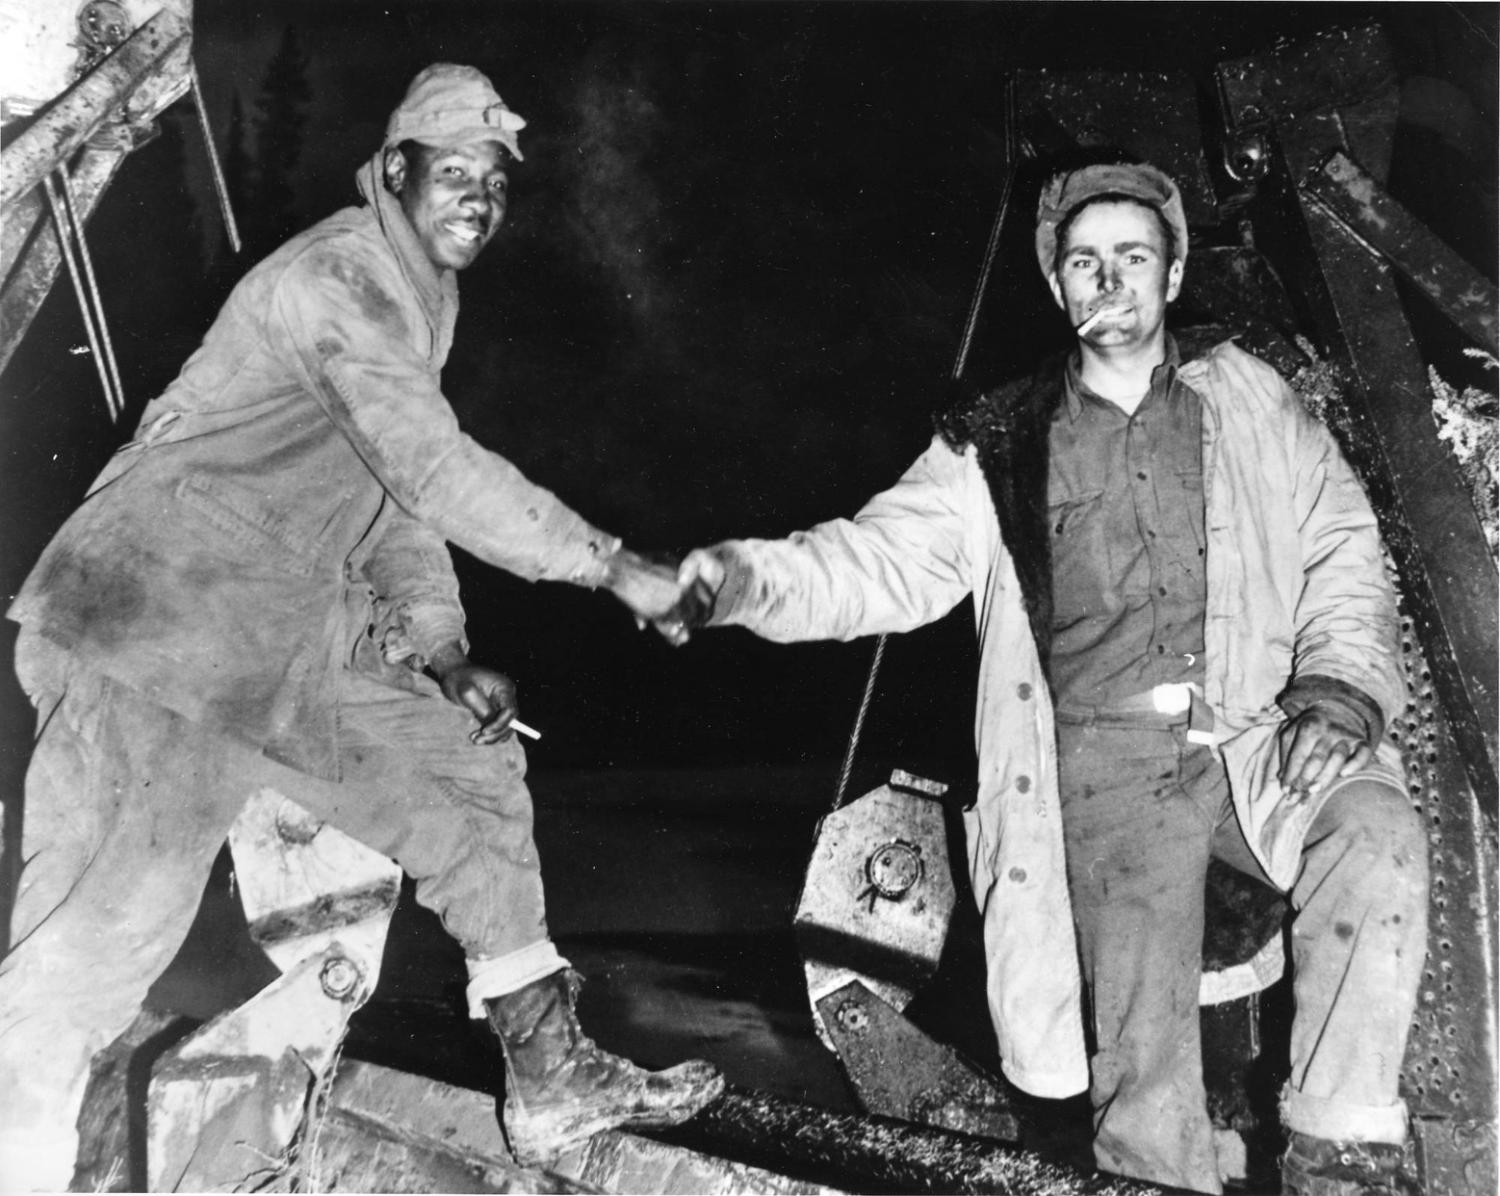 Meeting of bulldozers at Beaver Creek, Yukon Territory, 25 October 1942. Left: Corporal Refines Sims, Jr. (Philadelphia), 97th Engineers. Right: Pvt. Alfred Jalufka (Kennedy, Tex), 18th Engineers.